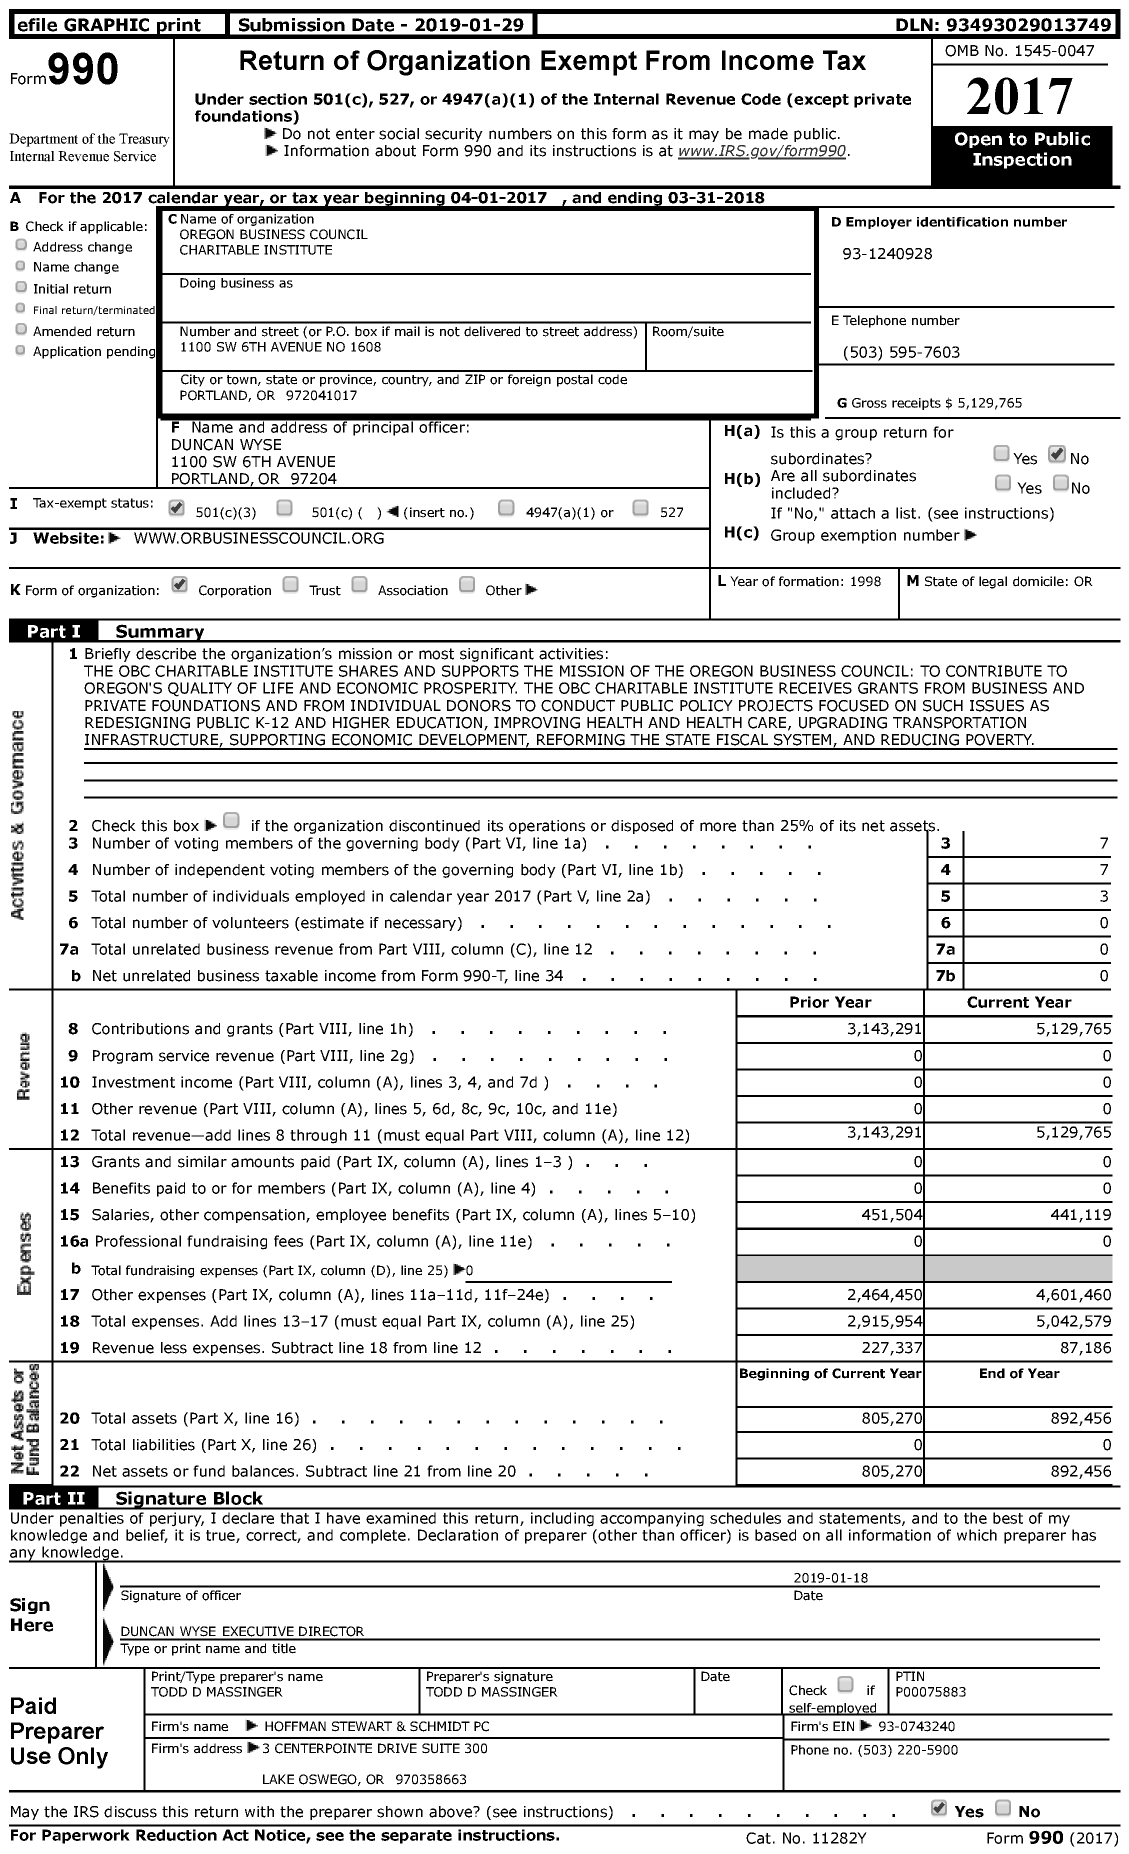 Image of first page of 2017 Form 990 for Oregon Business Council Charitable Institute